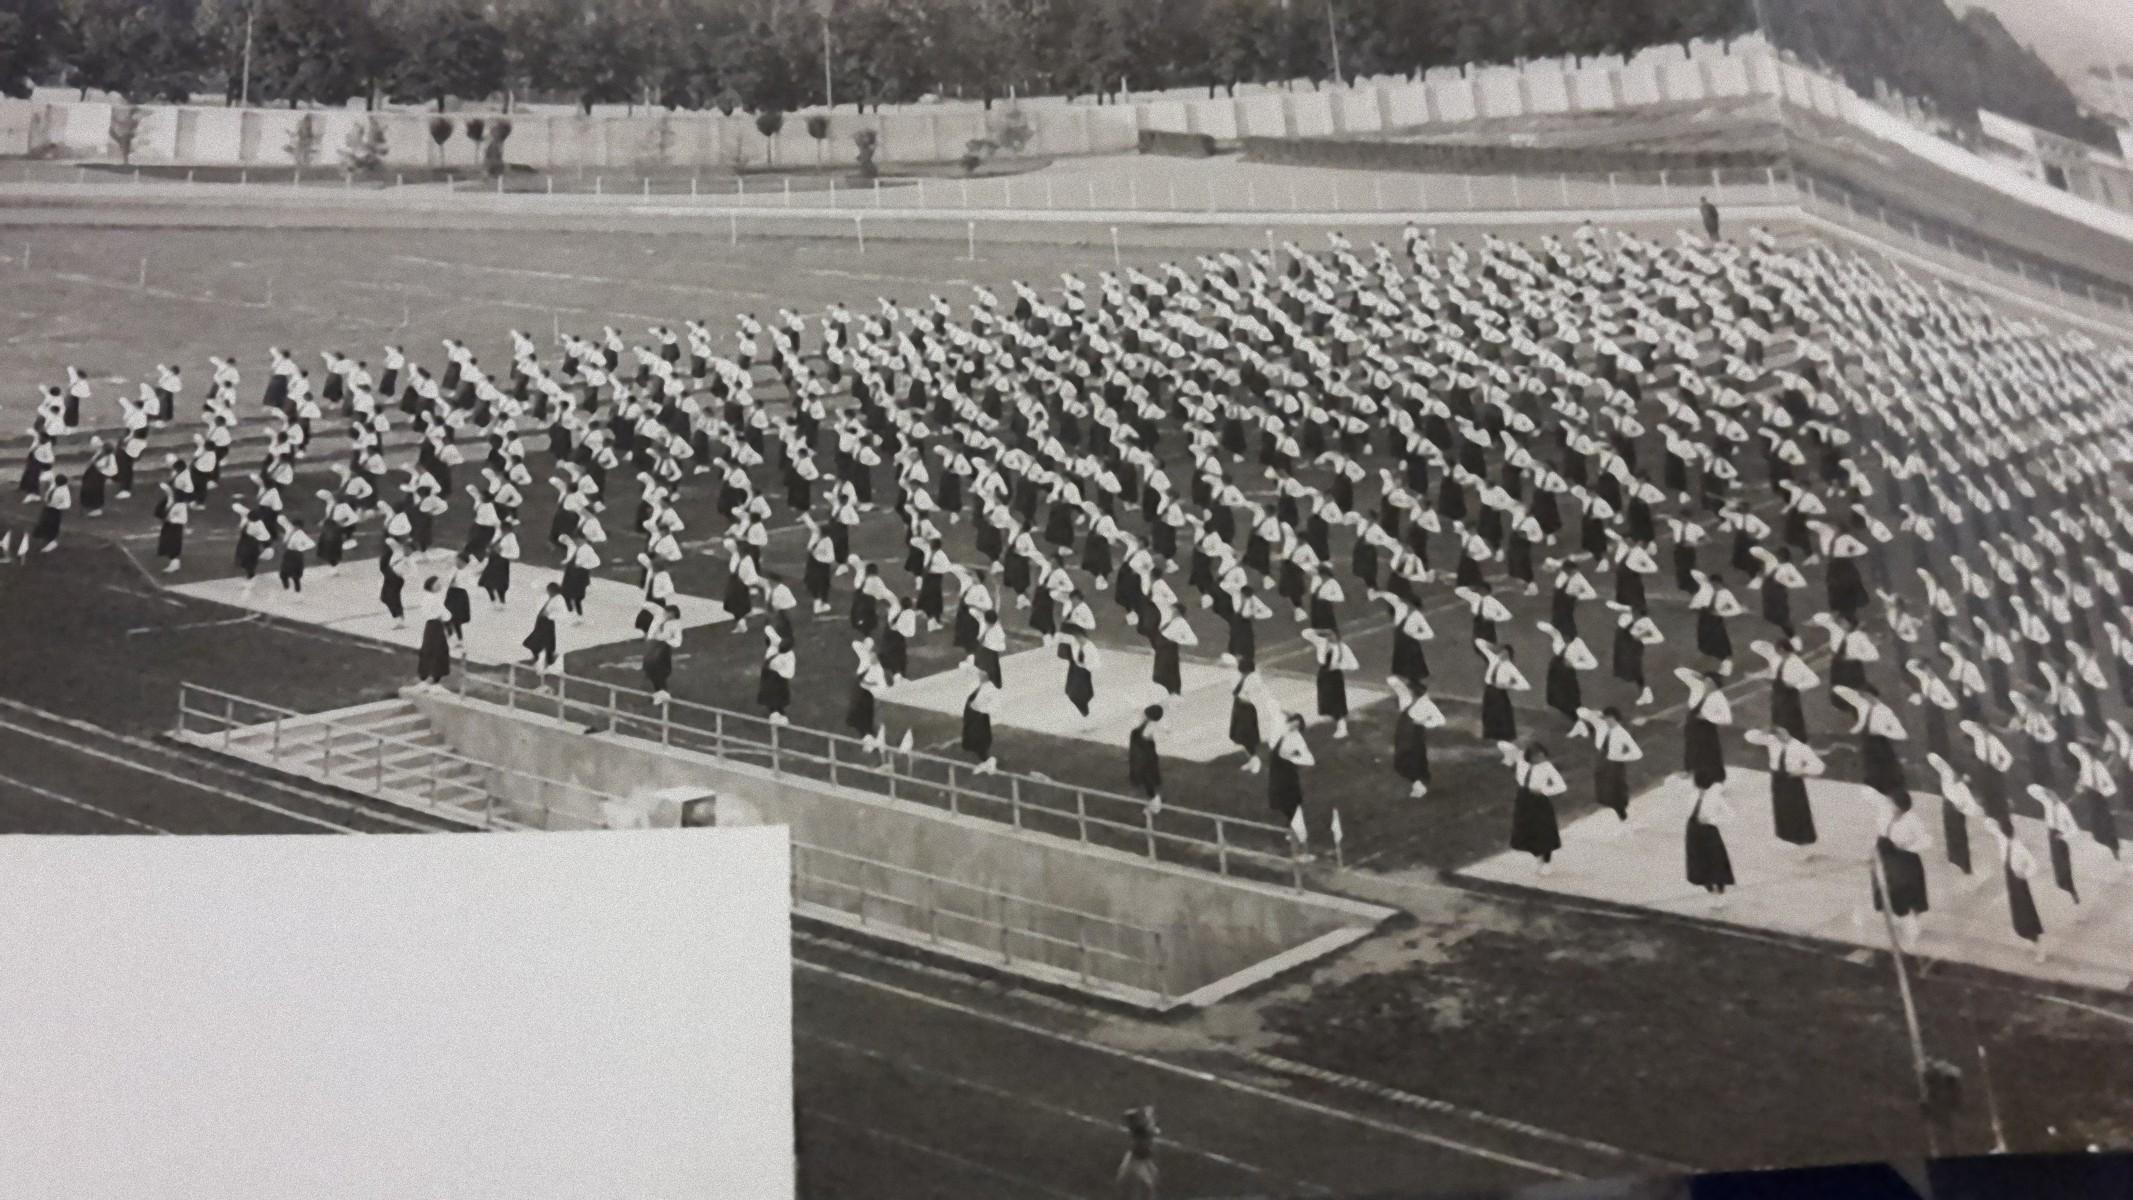 Unknown Figurative Photograph - Female Sport Exercises during Fascism in Italy -Vintage b/w Photograph - 1934ca.